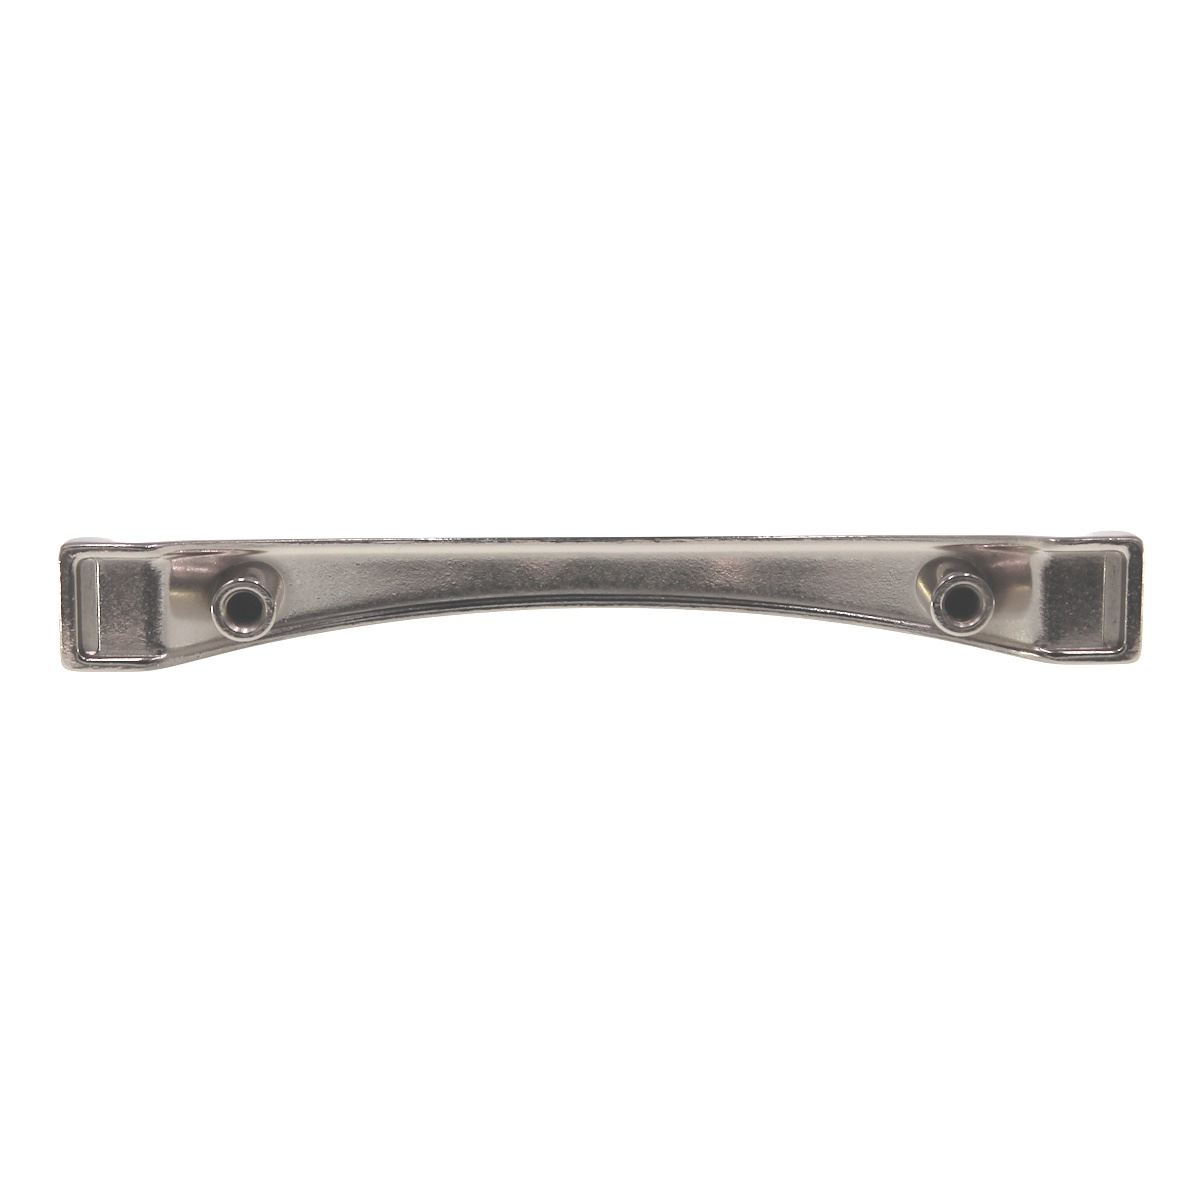 Hickory Hardware Conquest 3" Ctr Cabinet Arch Pull Satin Nickel P14461-SN